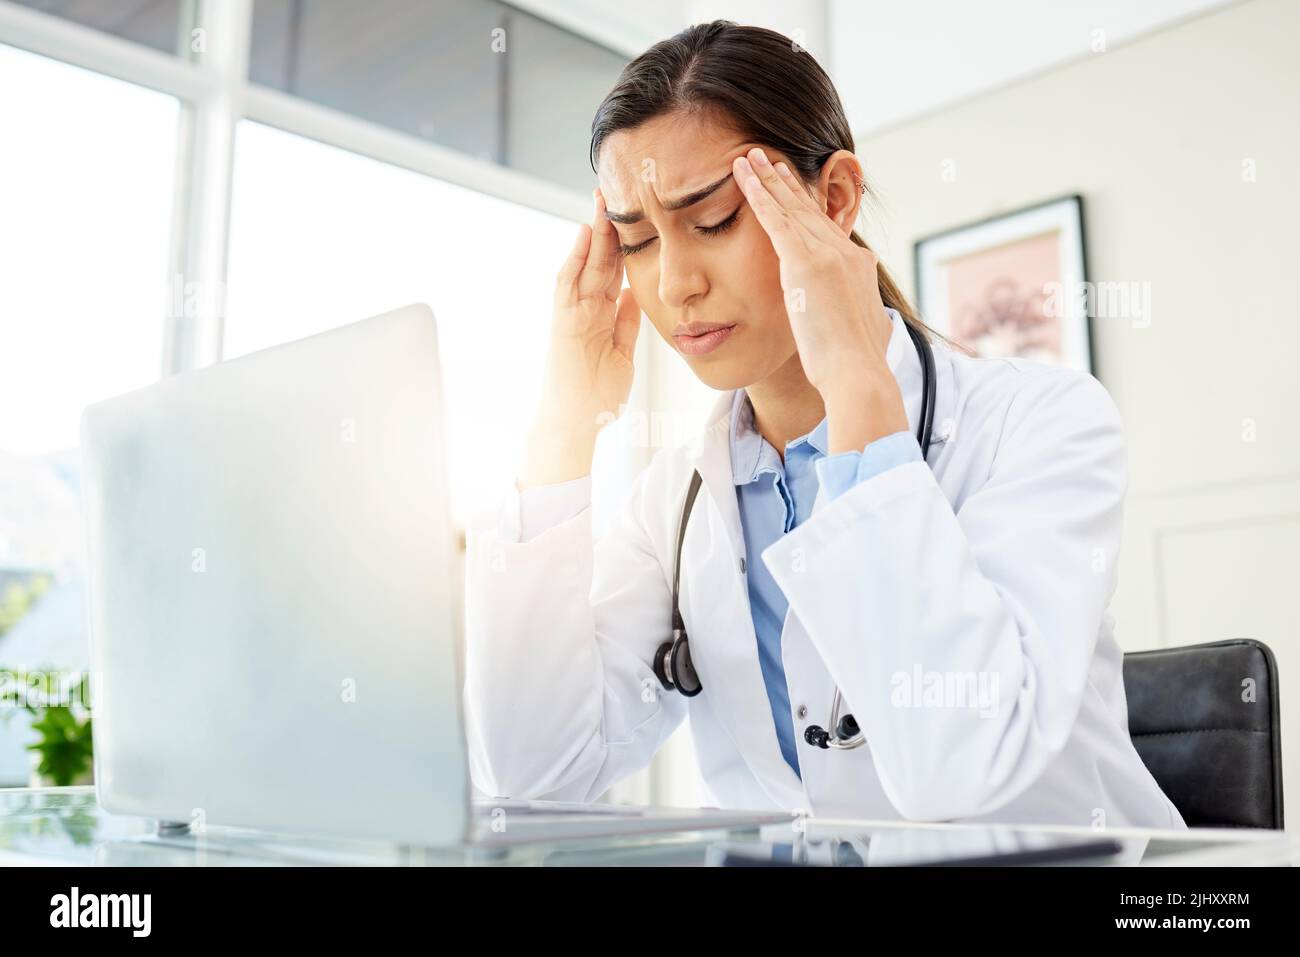 Closeup of a young mixed race doctor looking worried and suffering from a headache while working on a computer in her office. Hispanic female Stock Photo